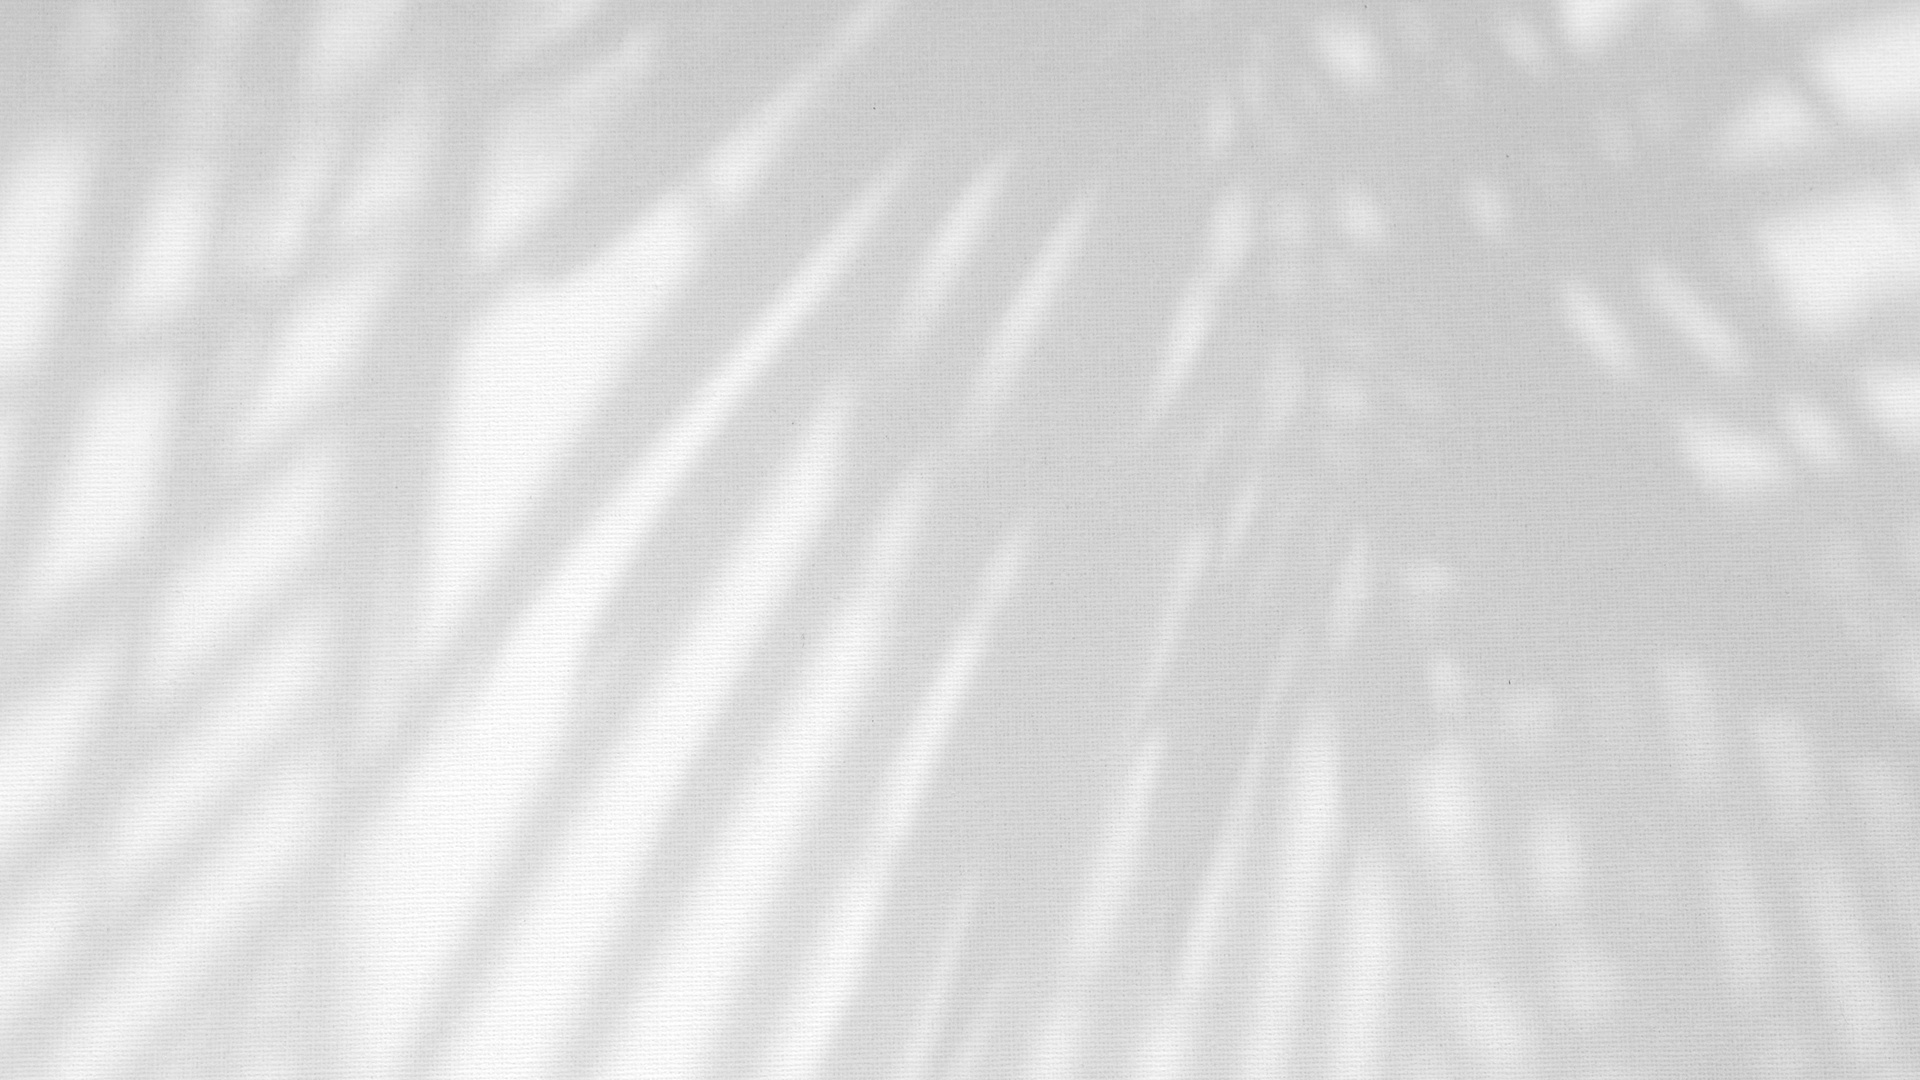 Leaves Natural Shadow Overlay on White Texture Background